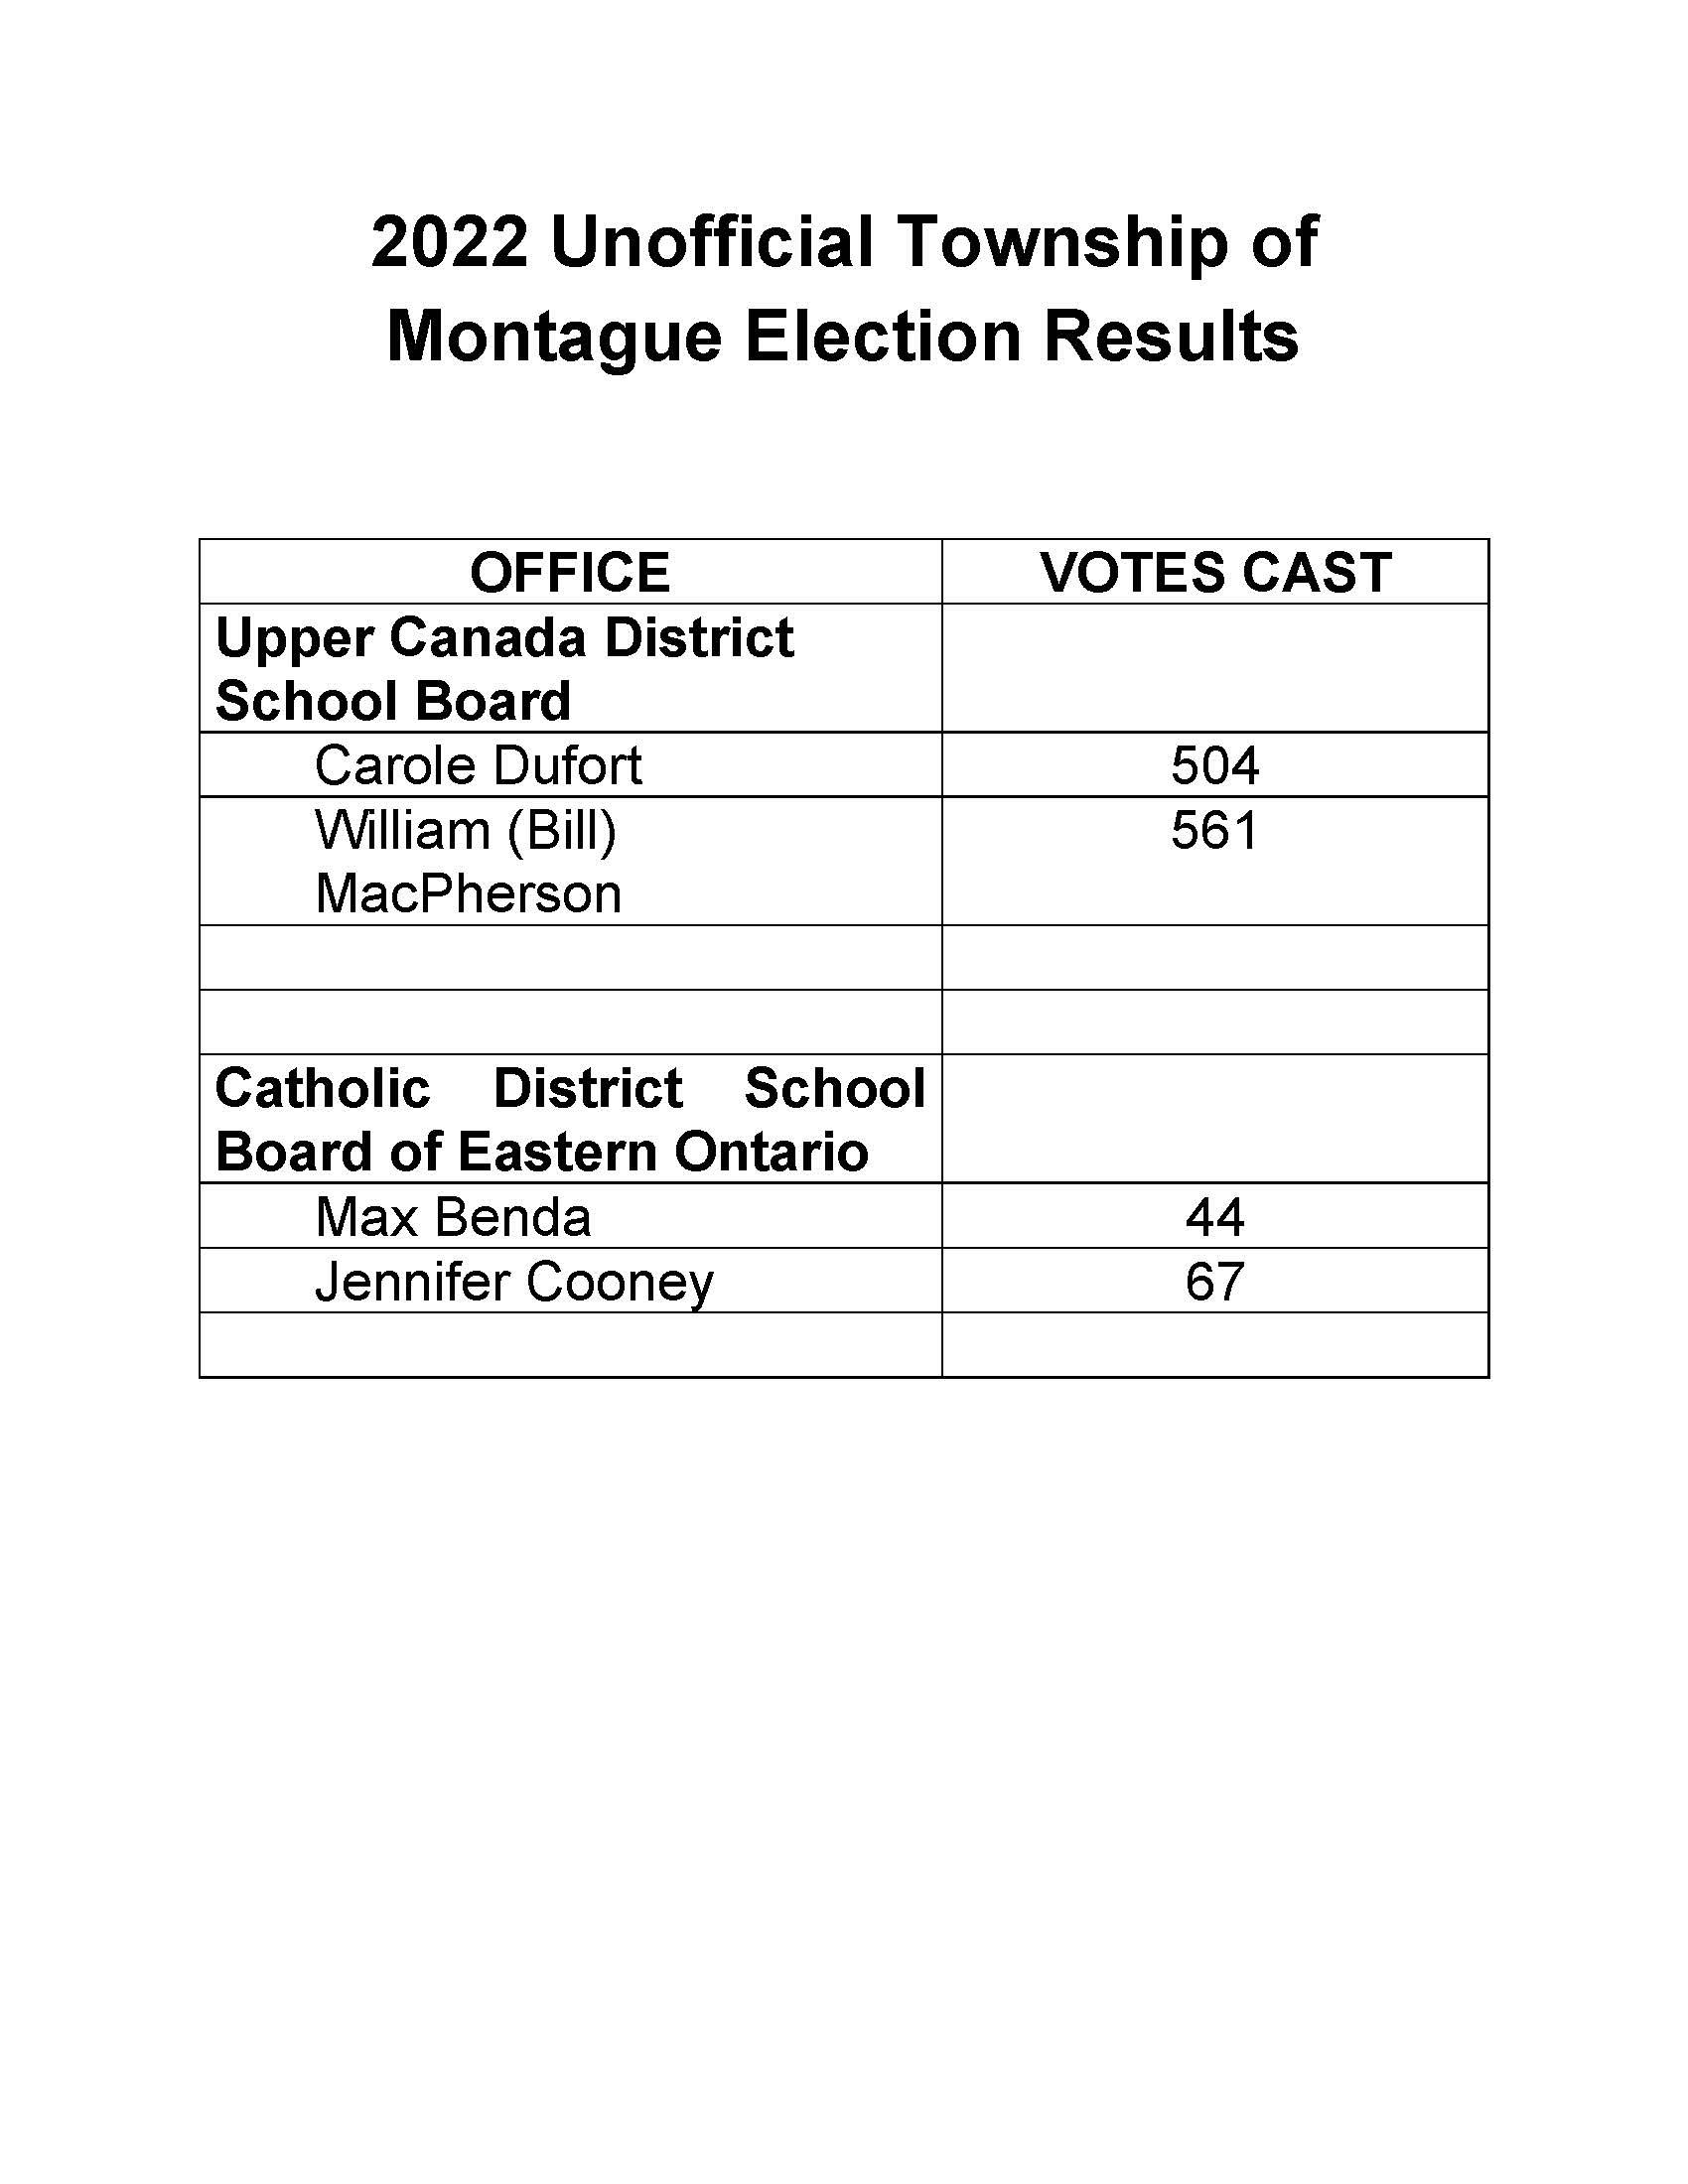 Results Unofficial Township of Montague School Board Results 2022